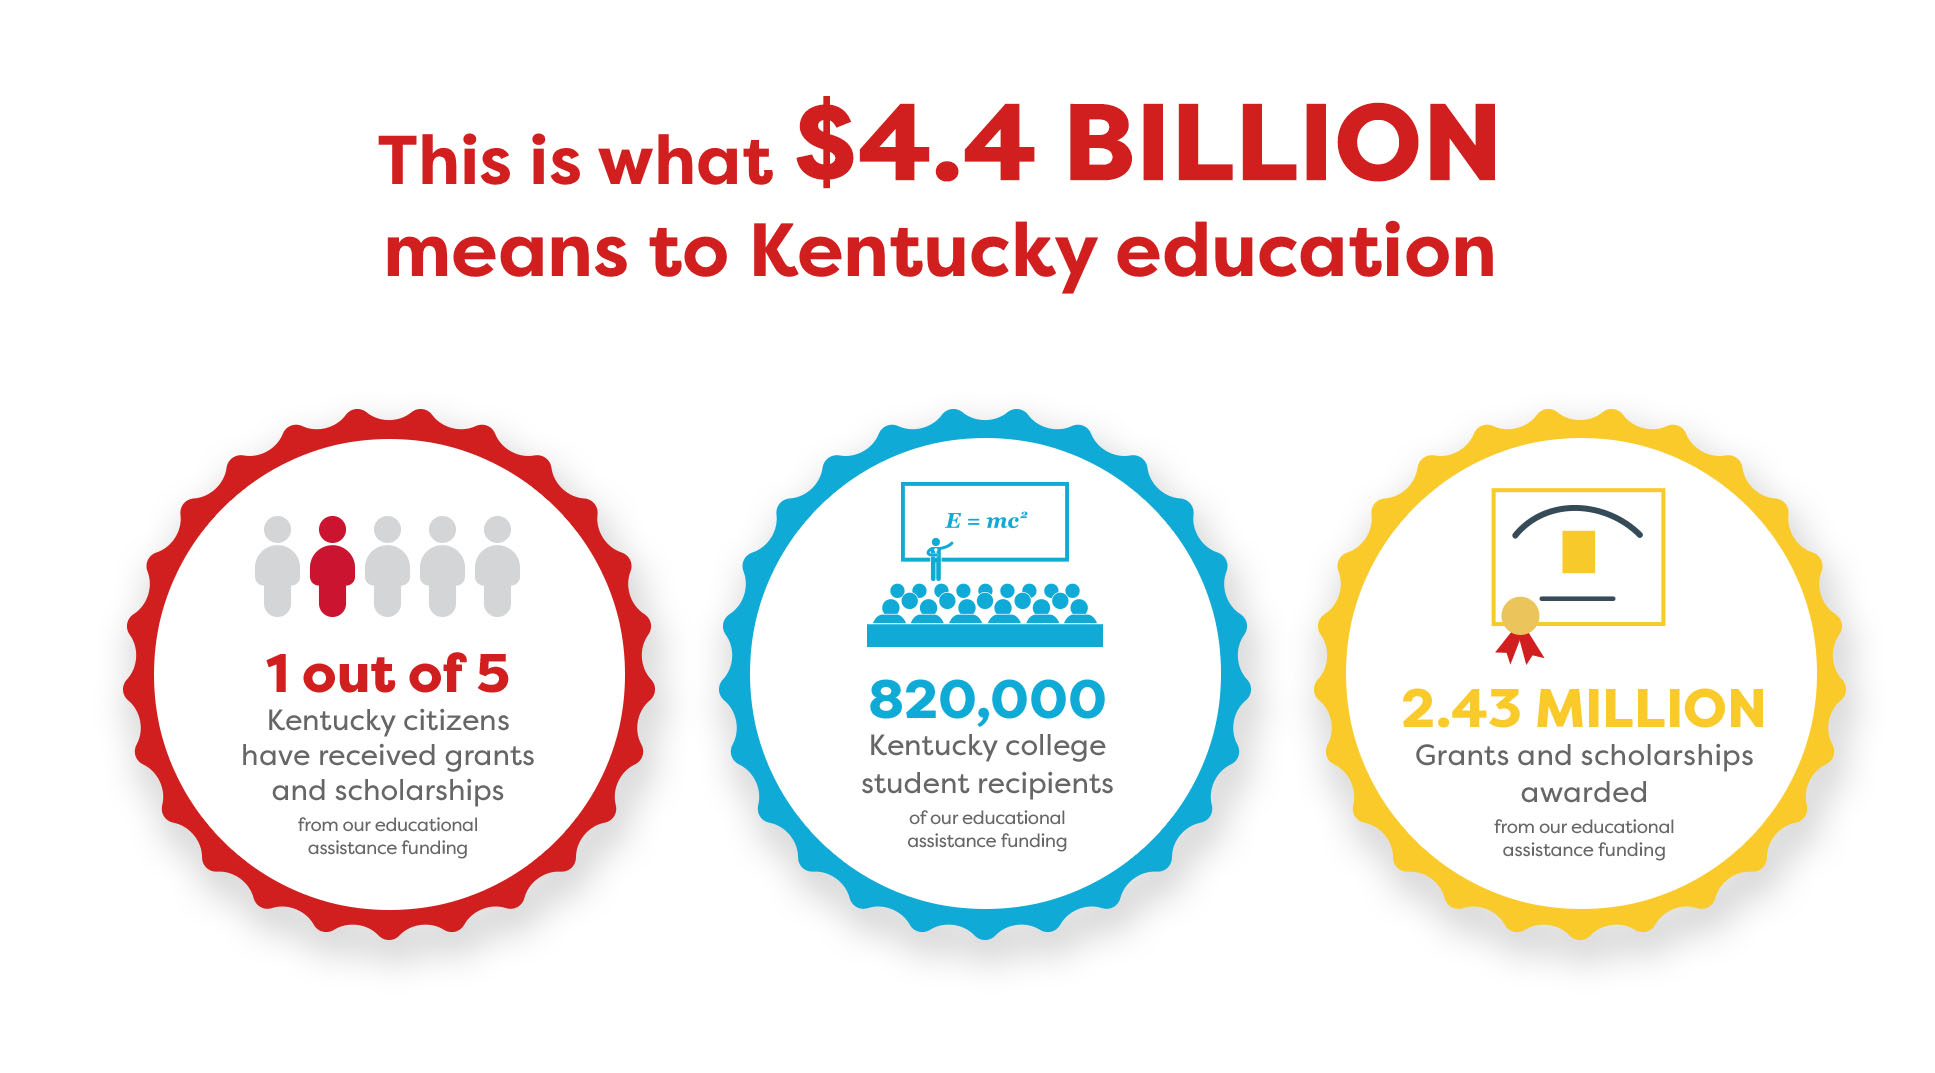 This is what $4.4 Billion means 1 out of 5 KY citizens received grants and scholarships, 861,000 KY college recipients, 2.7 Million grants and scholarships awarded